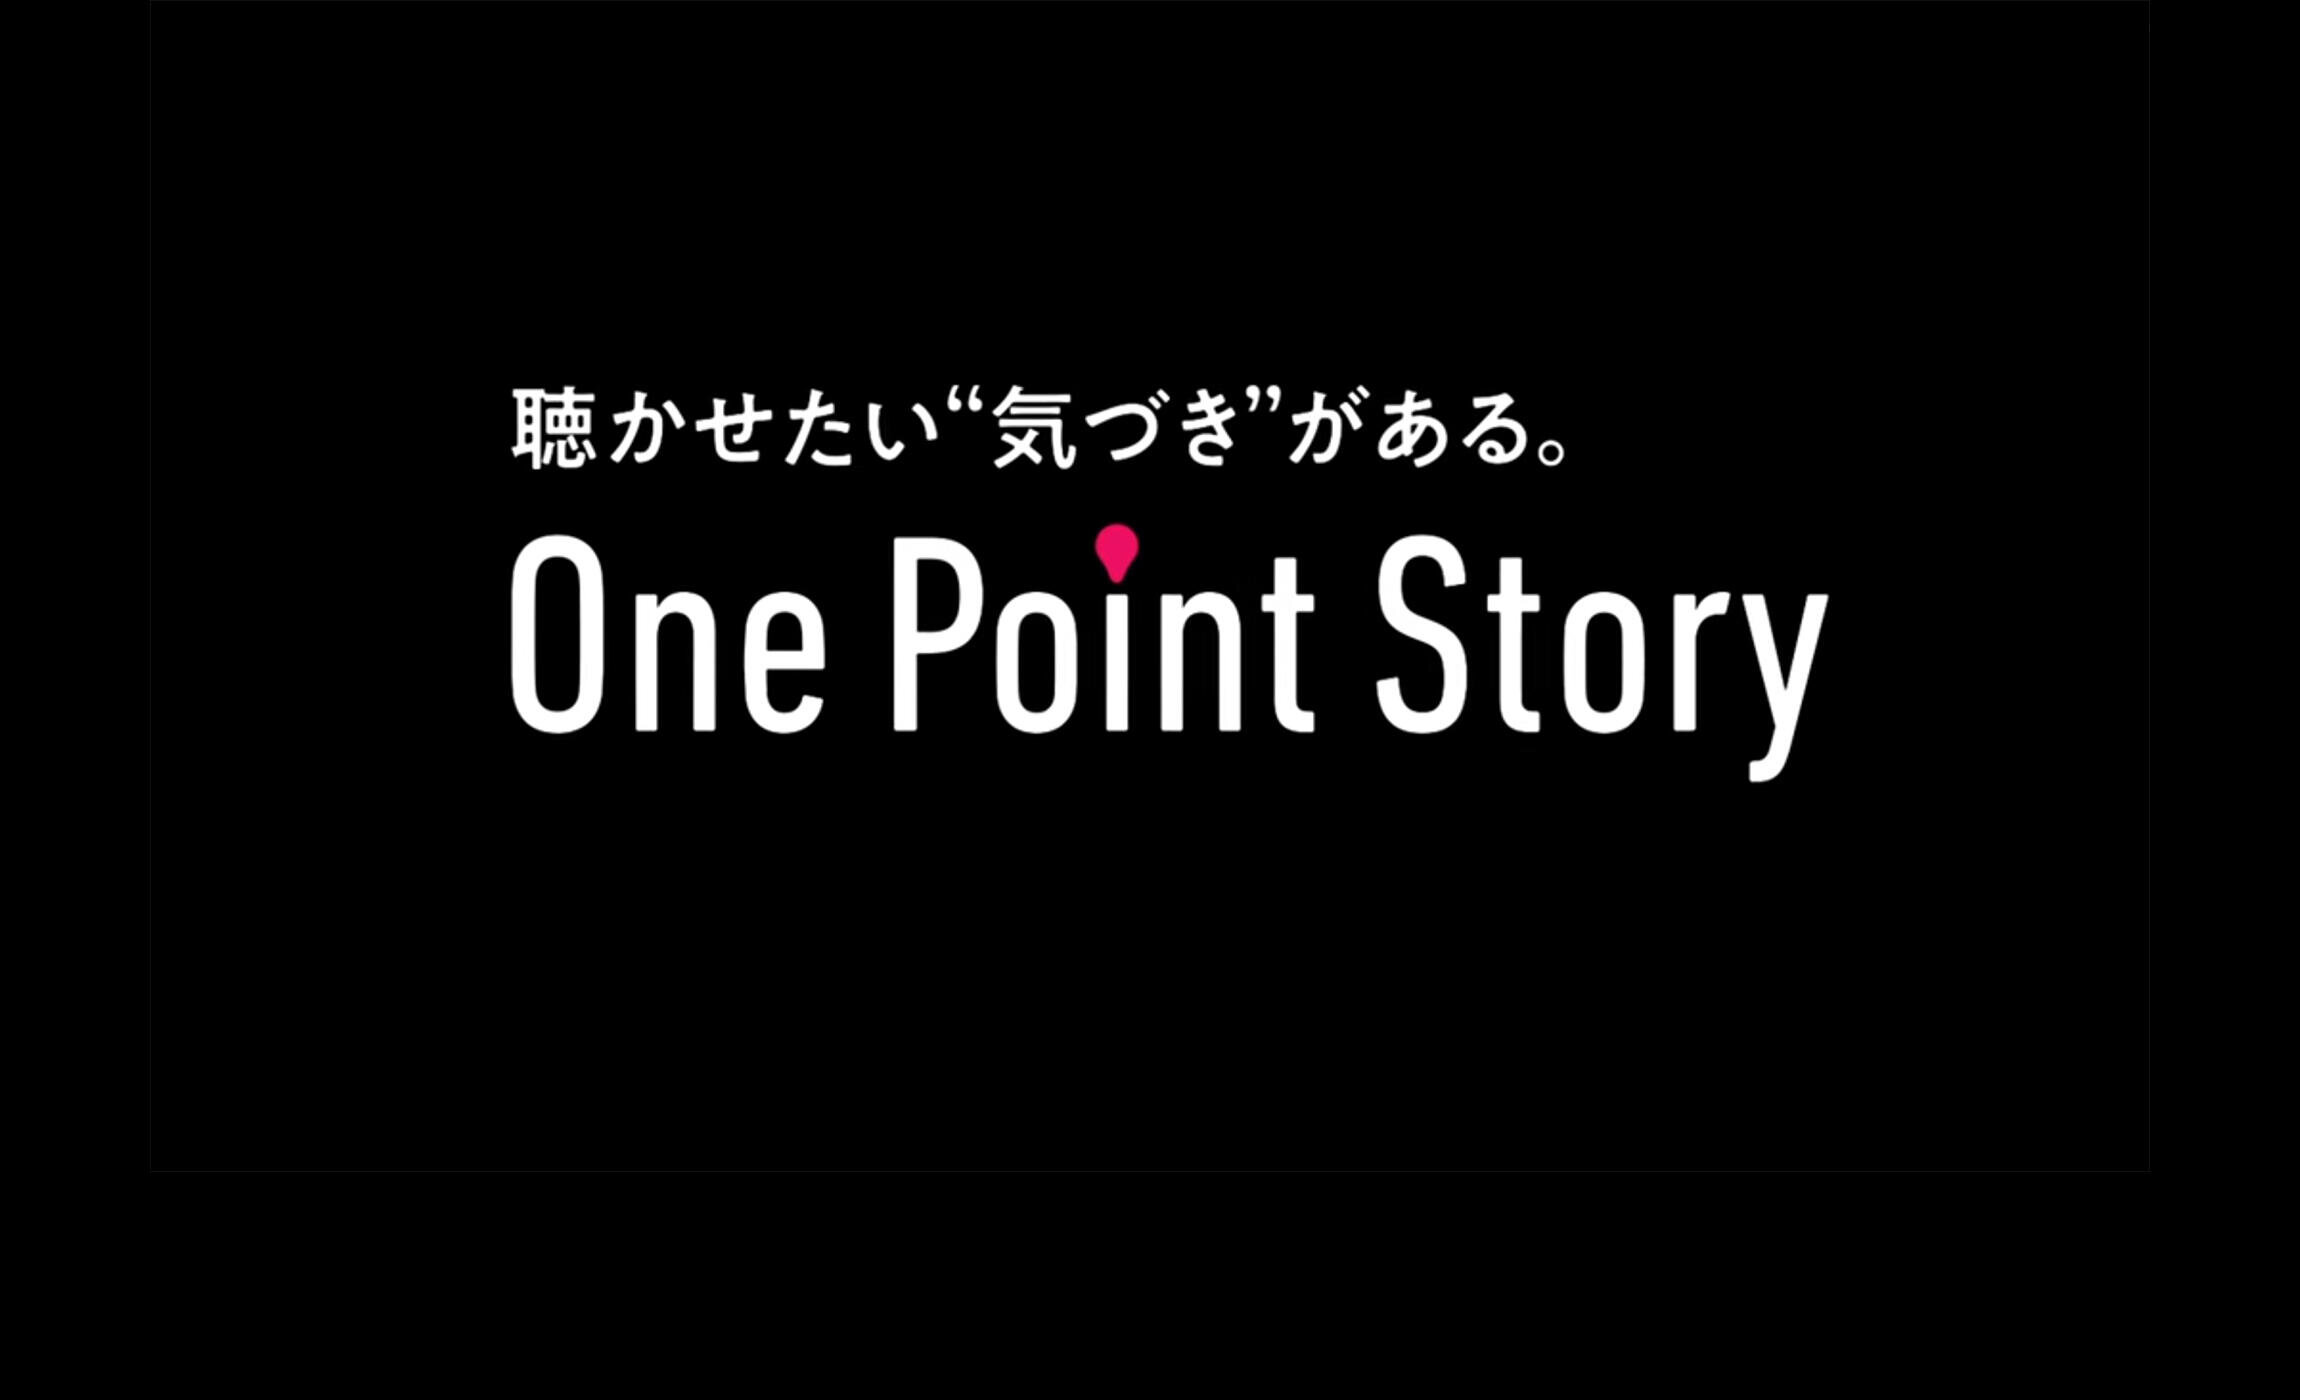 One Point Story